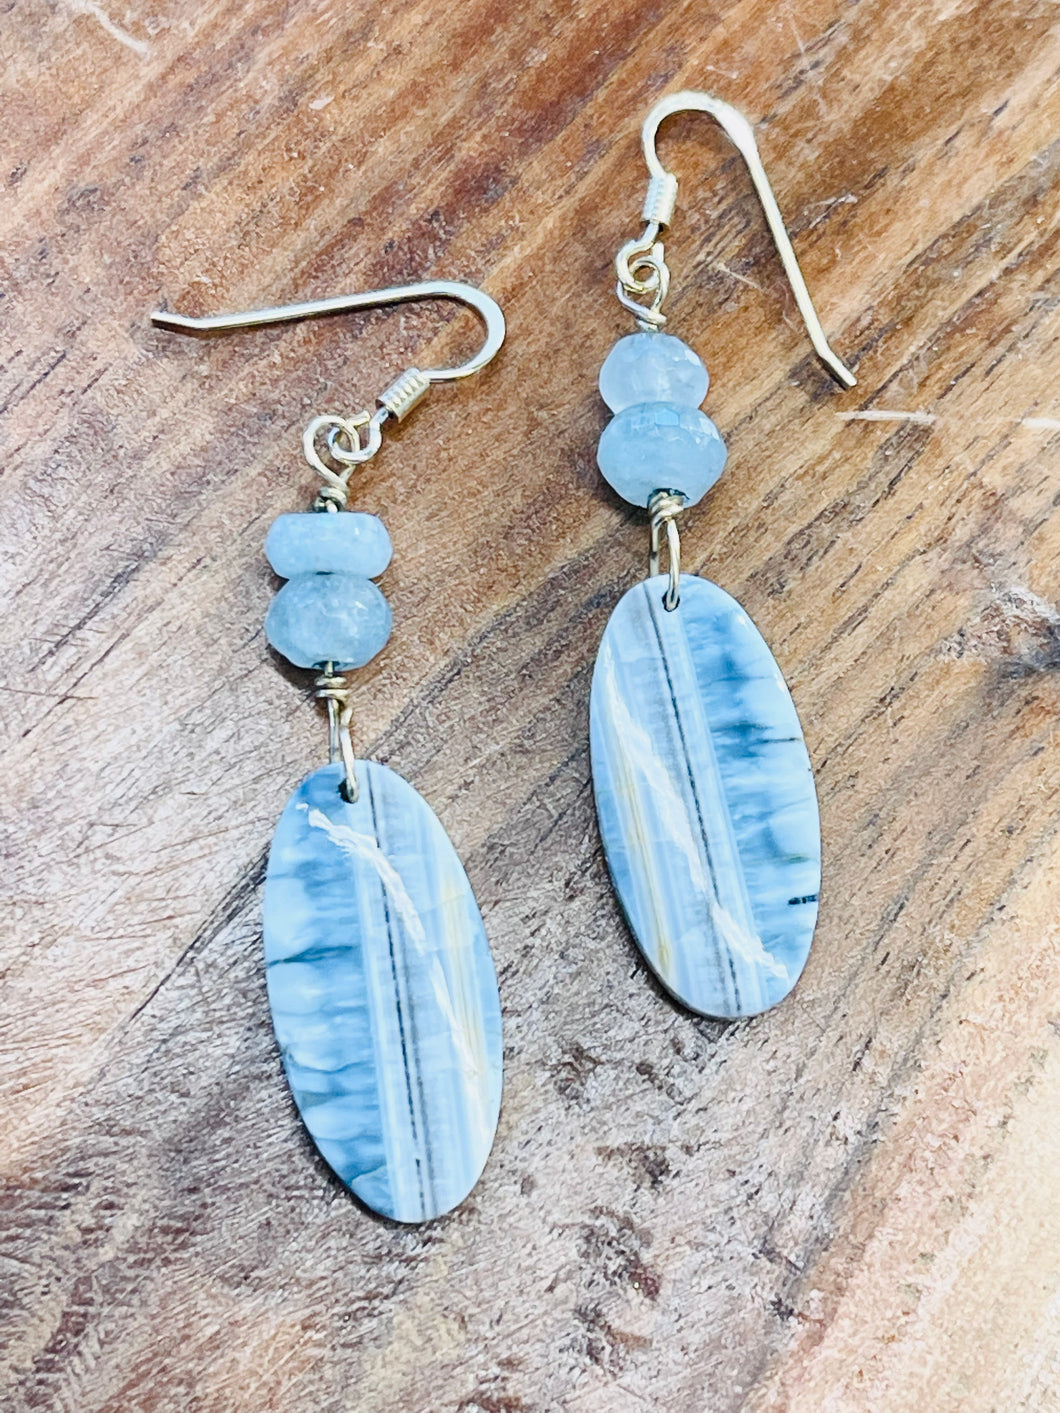 Earrings of blue opal and aquamarine beads in sterling silver